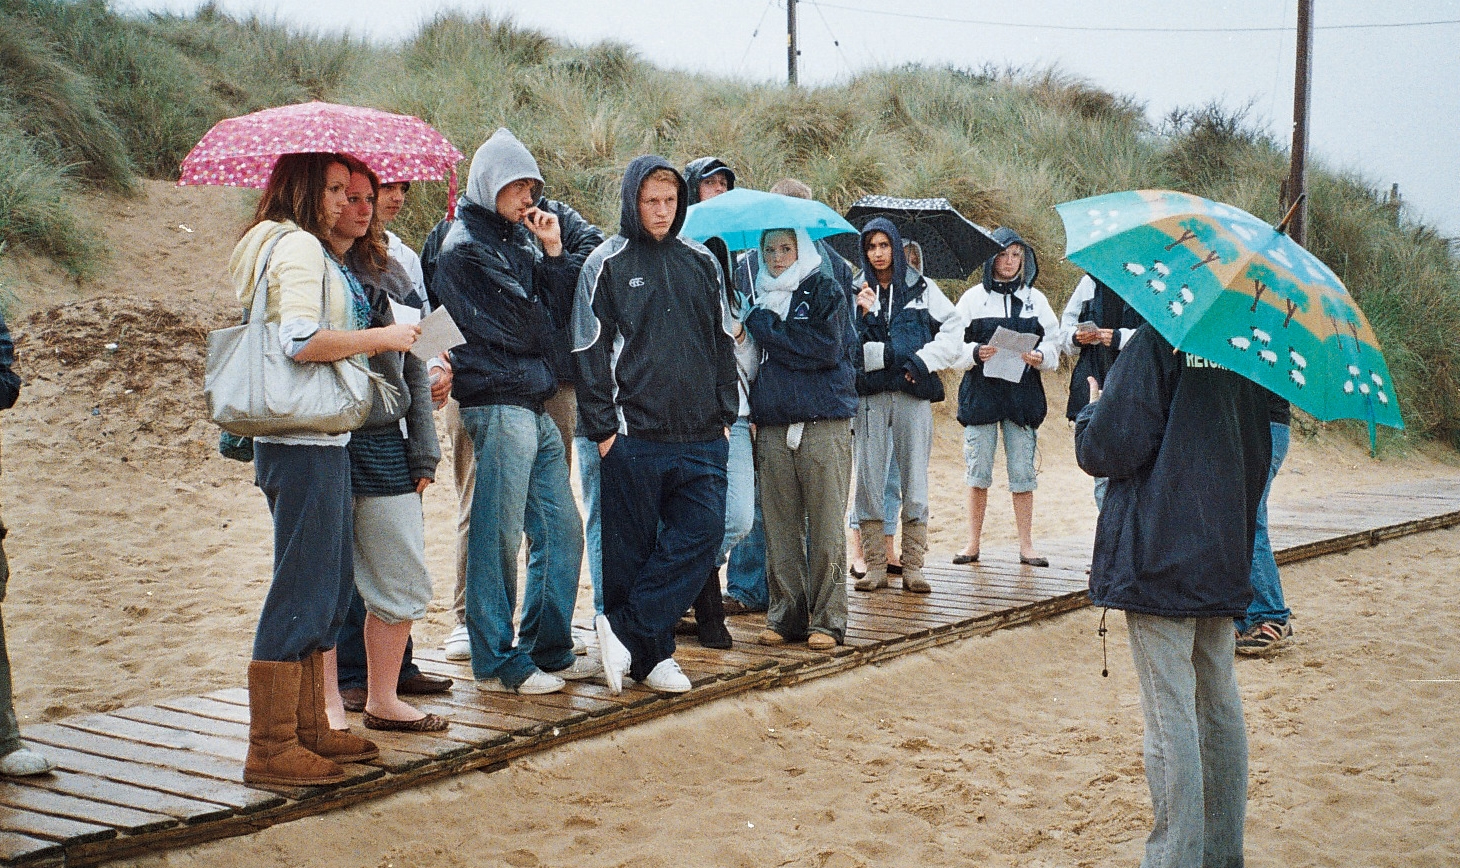 Some happy RGS students enjoying the UK summer on Hemsby Beach back in 2007